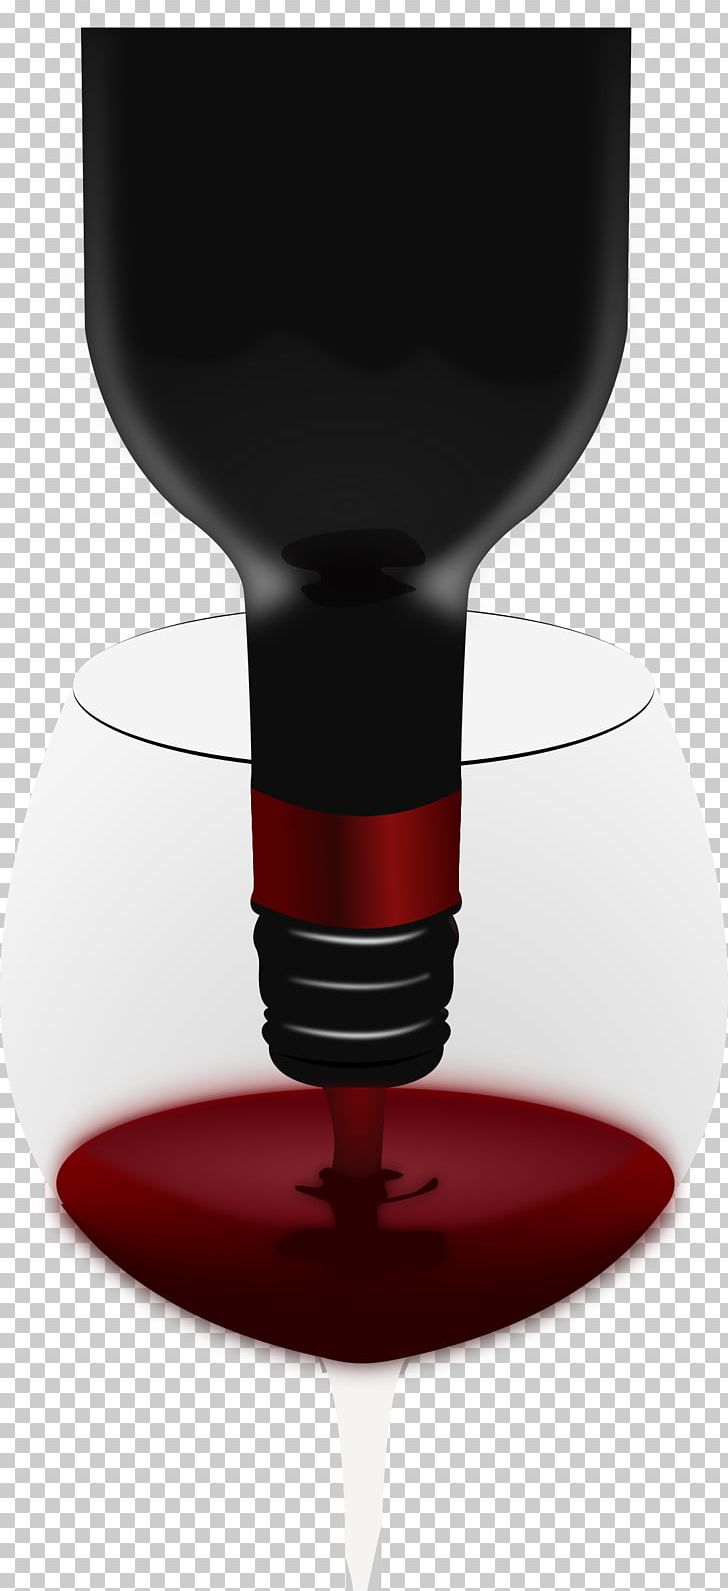 Wine Glass Red Wine Bottle PNG, Clipart, Barware, Bottle, Bottle Of Wine, Champagne, Champagne Glass Free PNG Download